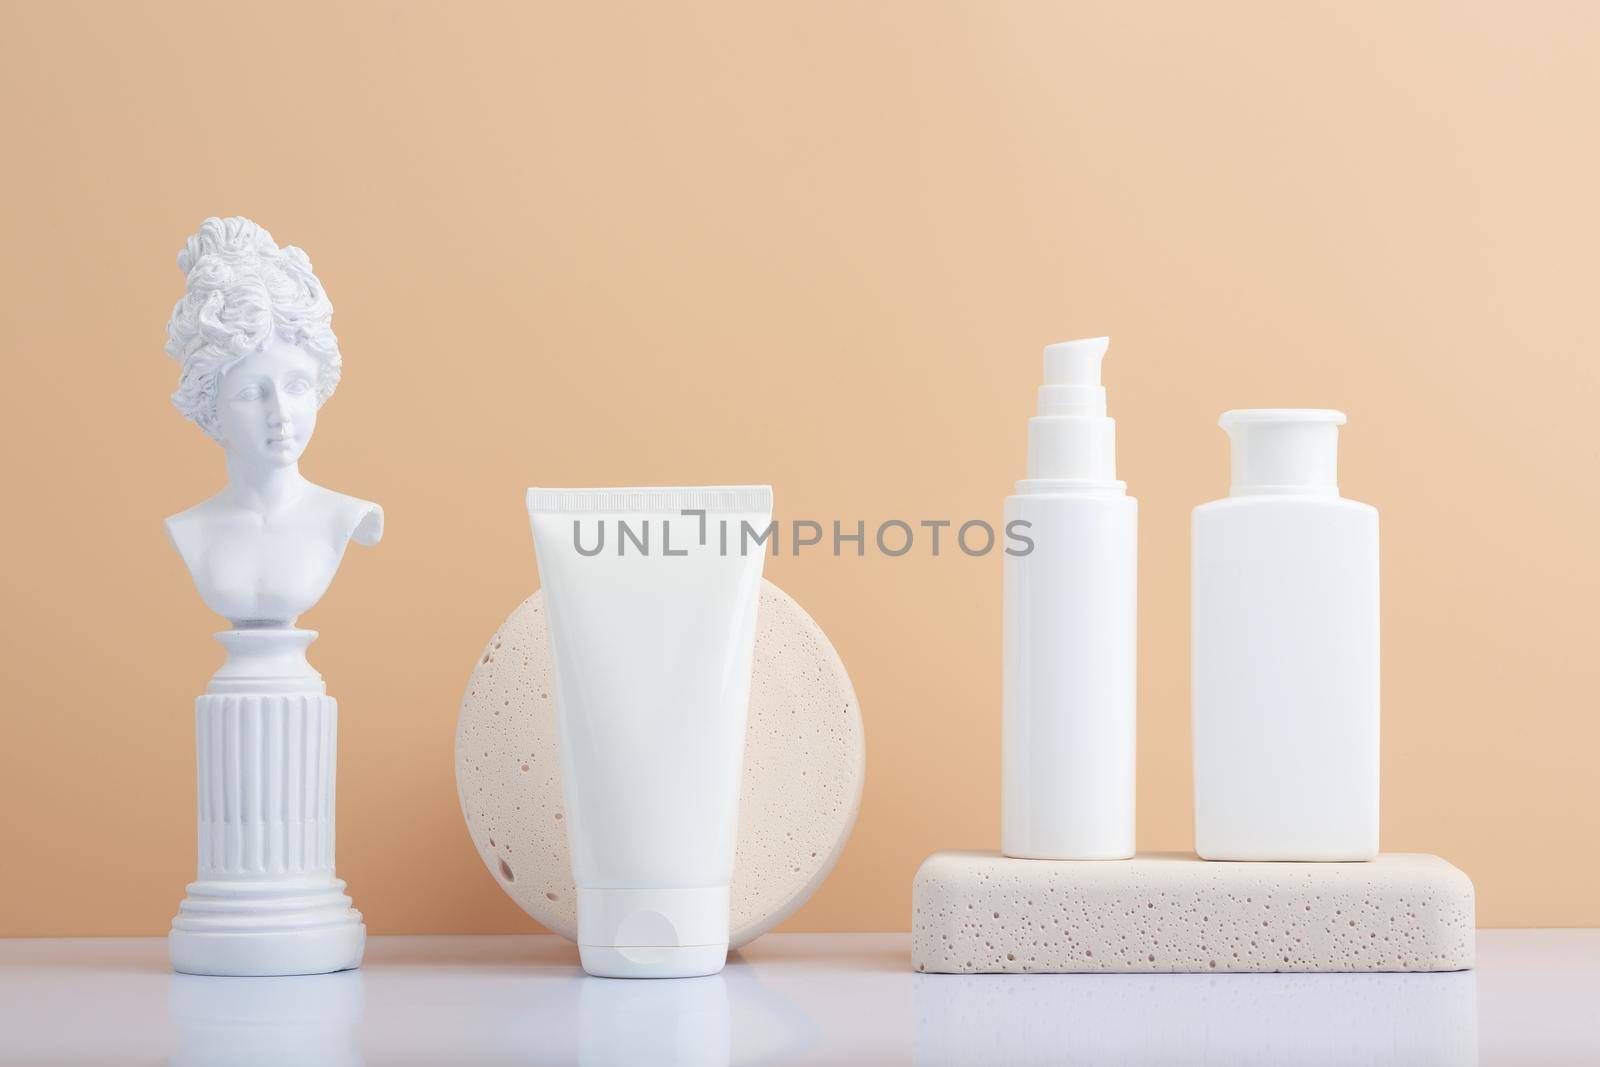 Set of skin care products with gypsum figure of a woman on white table against beige background. Face cream, moisturizing lotion and enzymic powder for face washing. Products for daily skin care